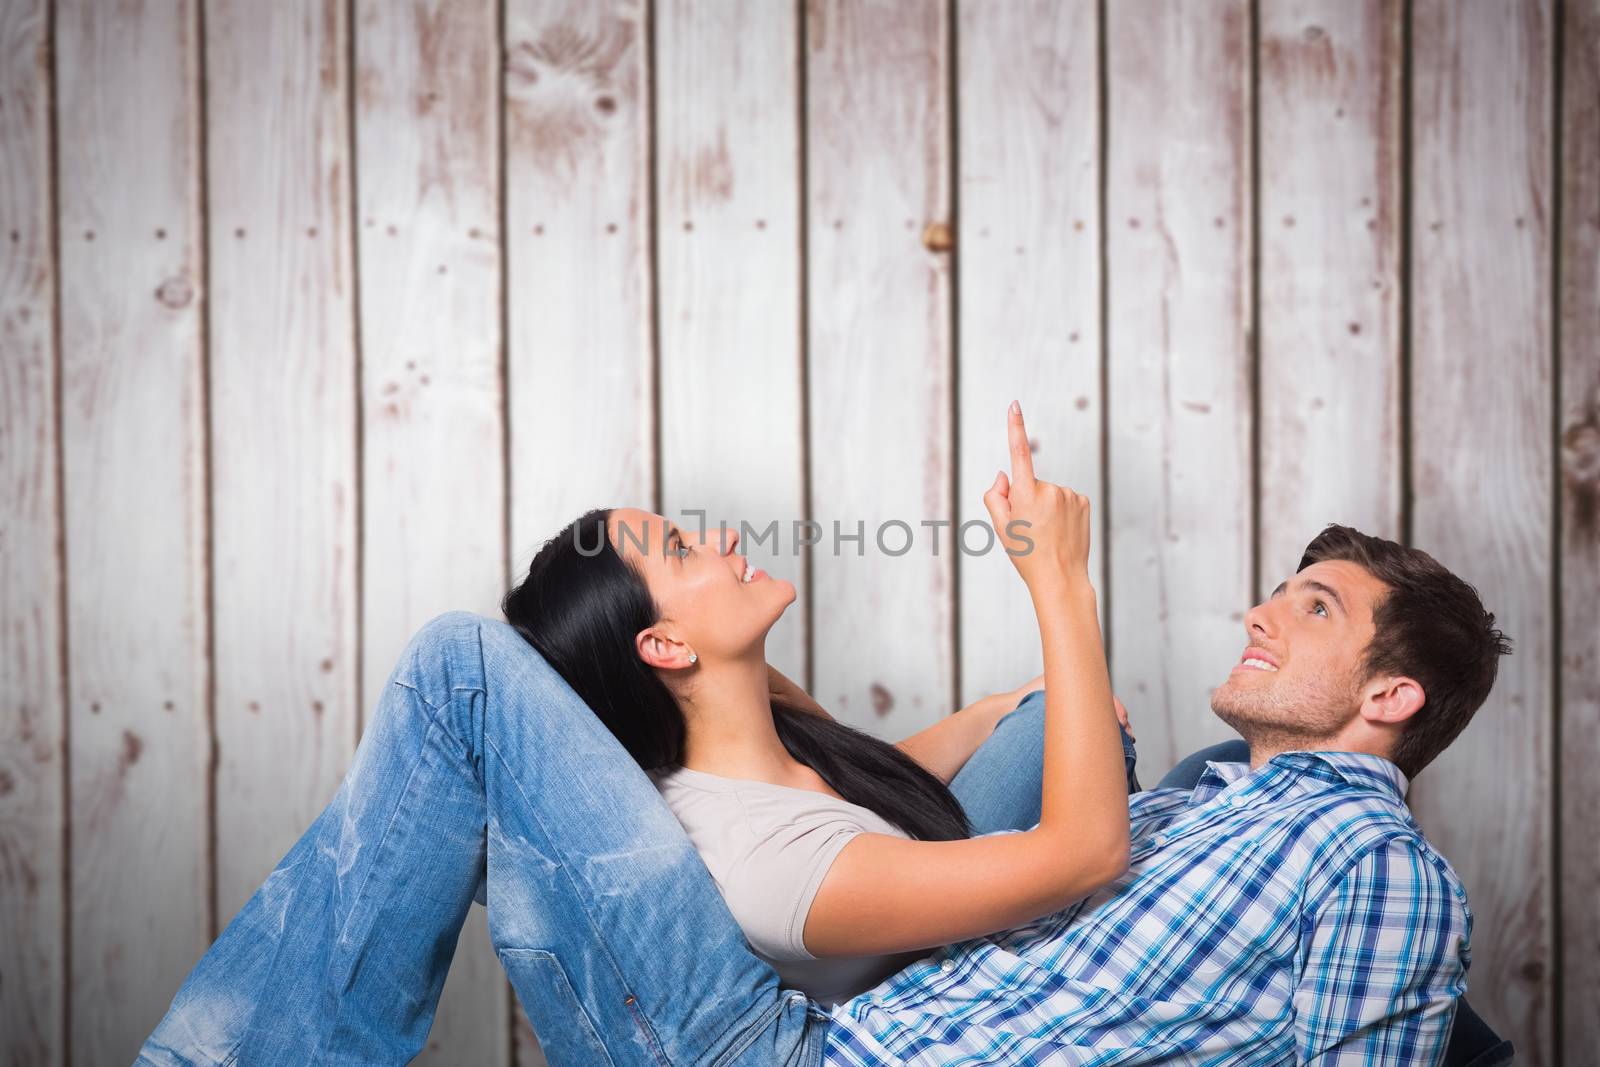 Young couple lying on floor smiling against wooden planks